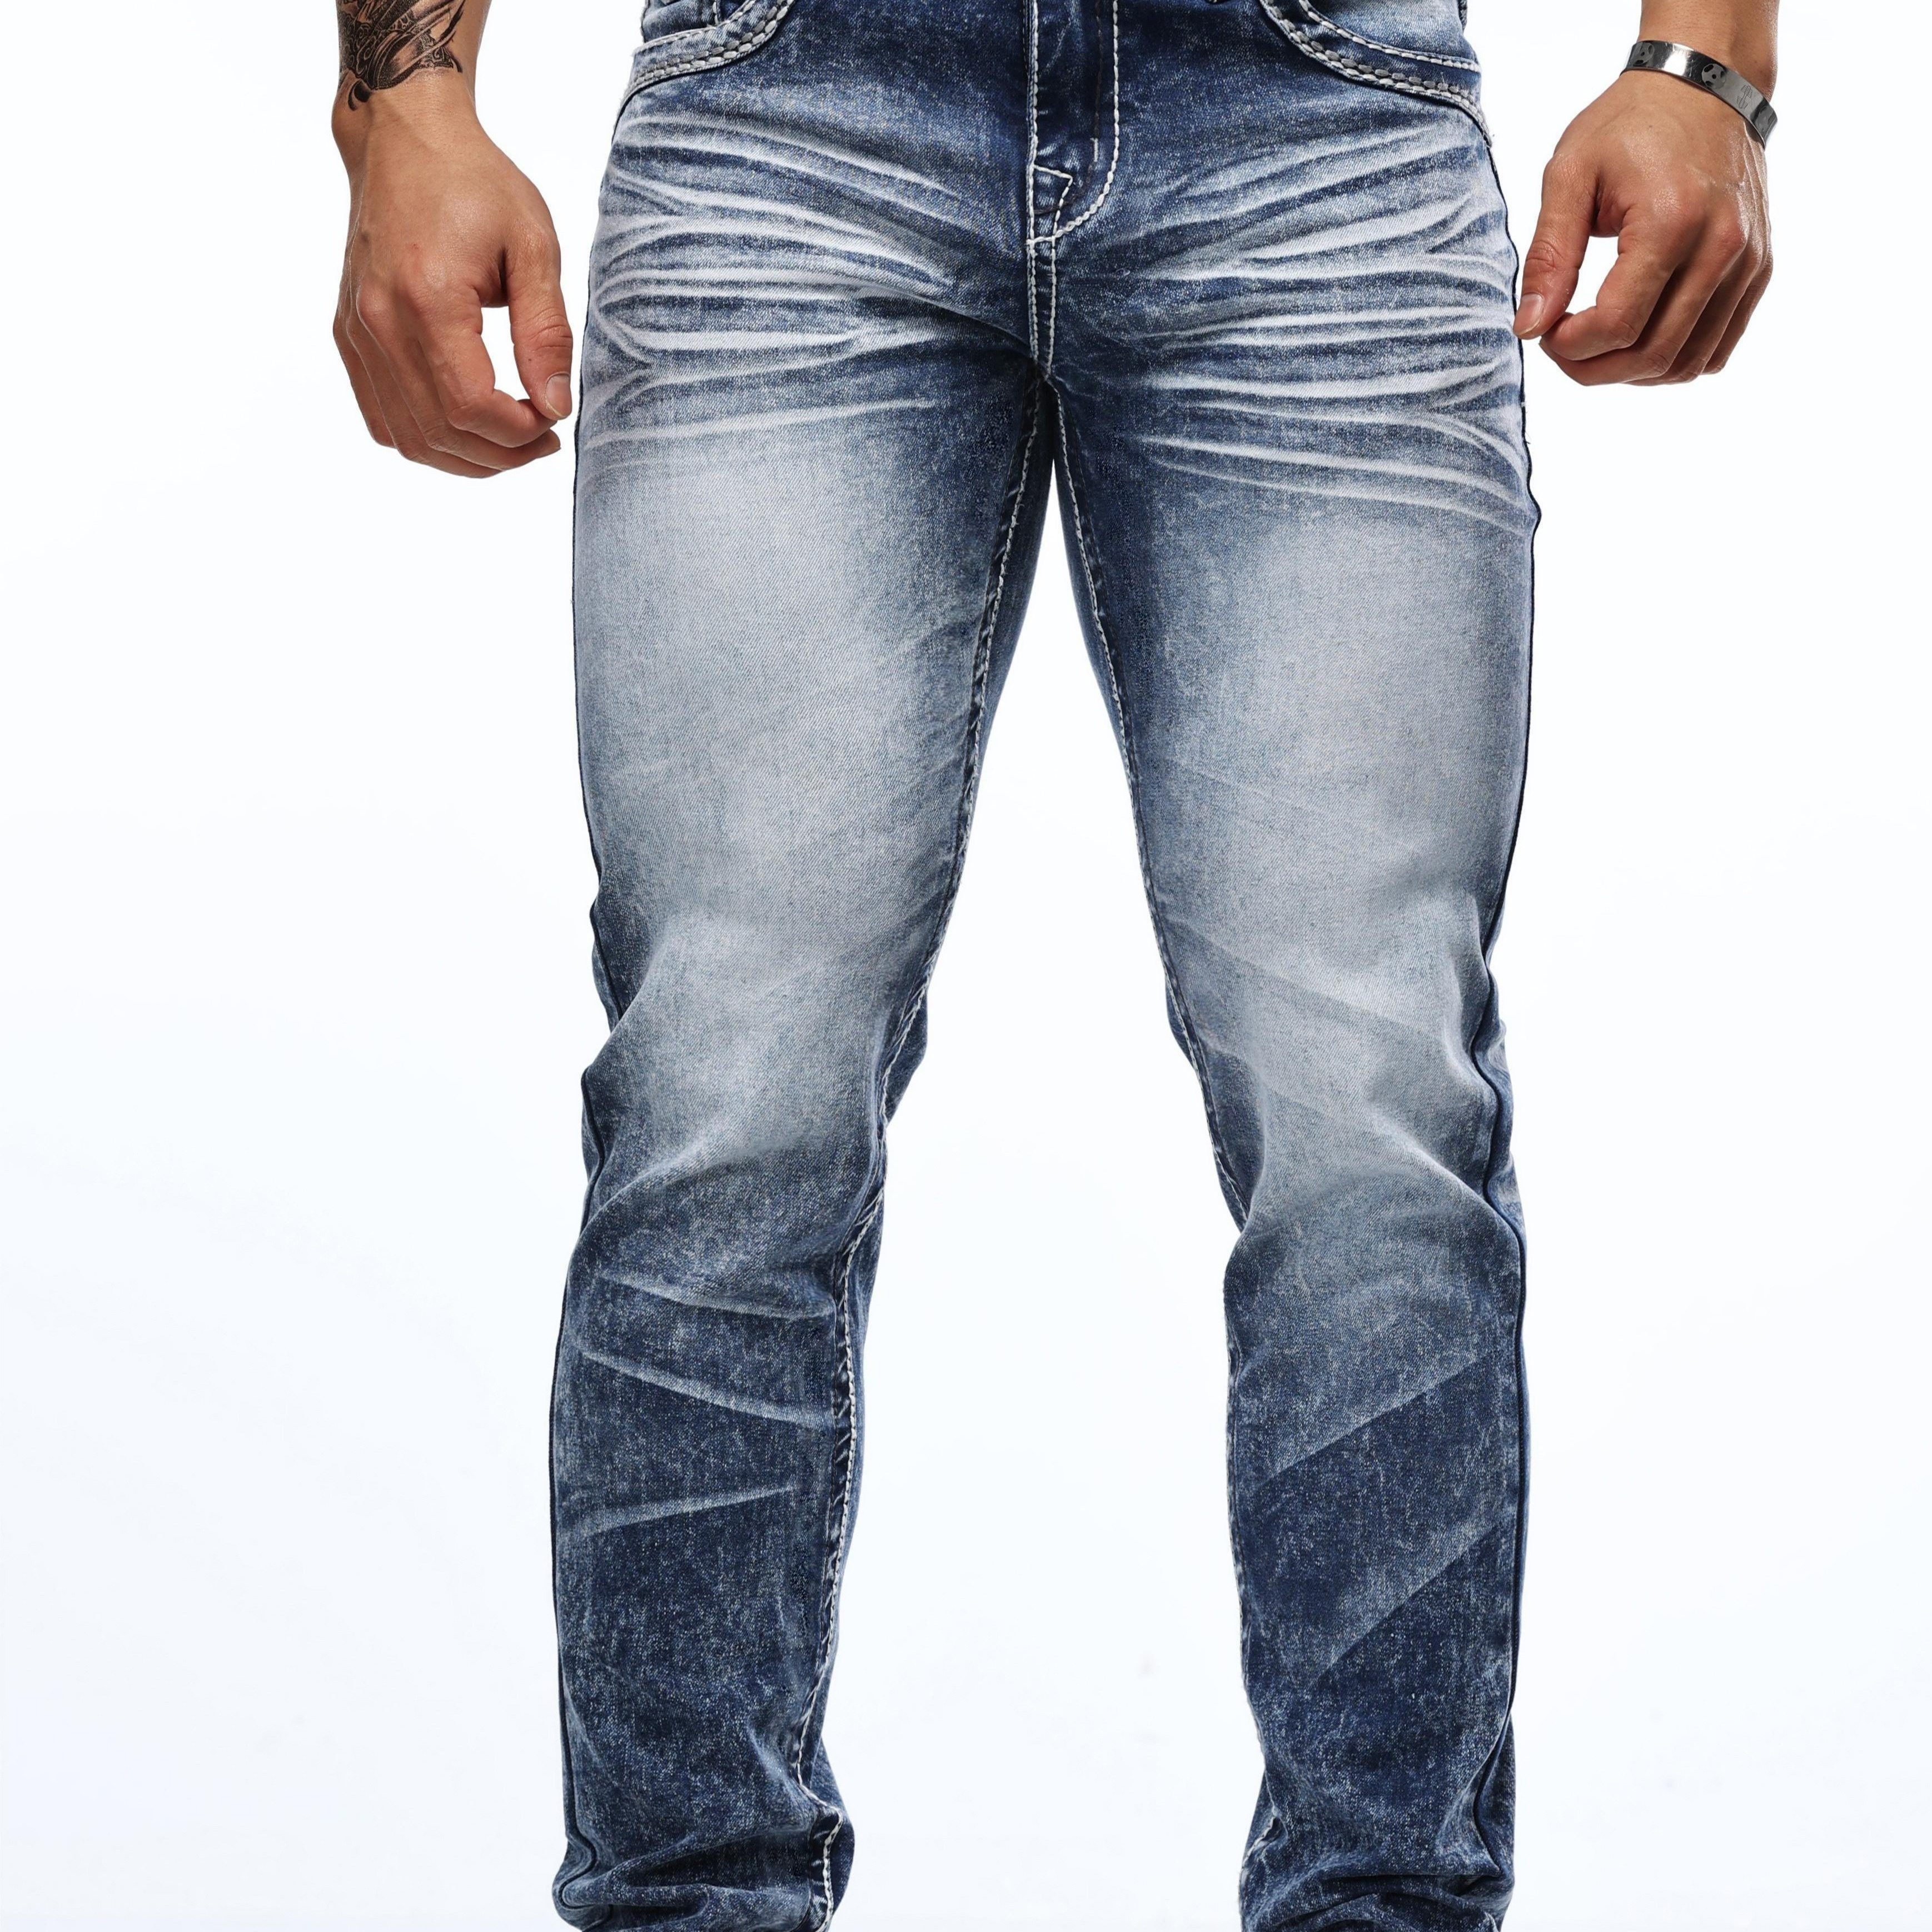 

Chic Solid Denim Pants For Men, Slim Fit Jeans For Male, Stylish Casual Streetwear